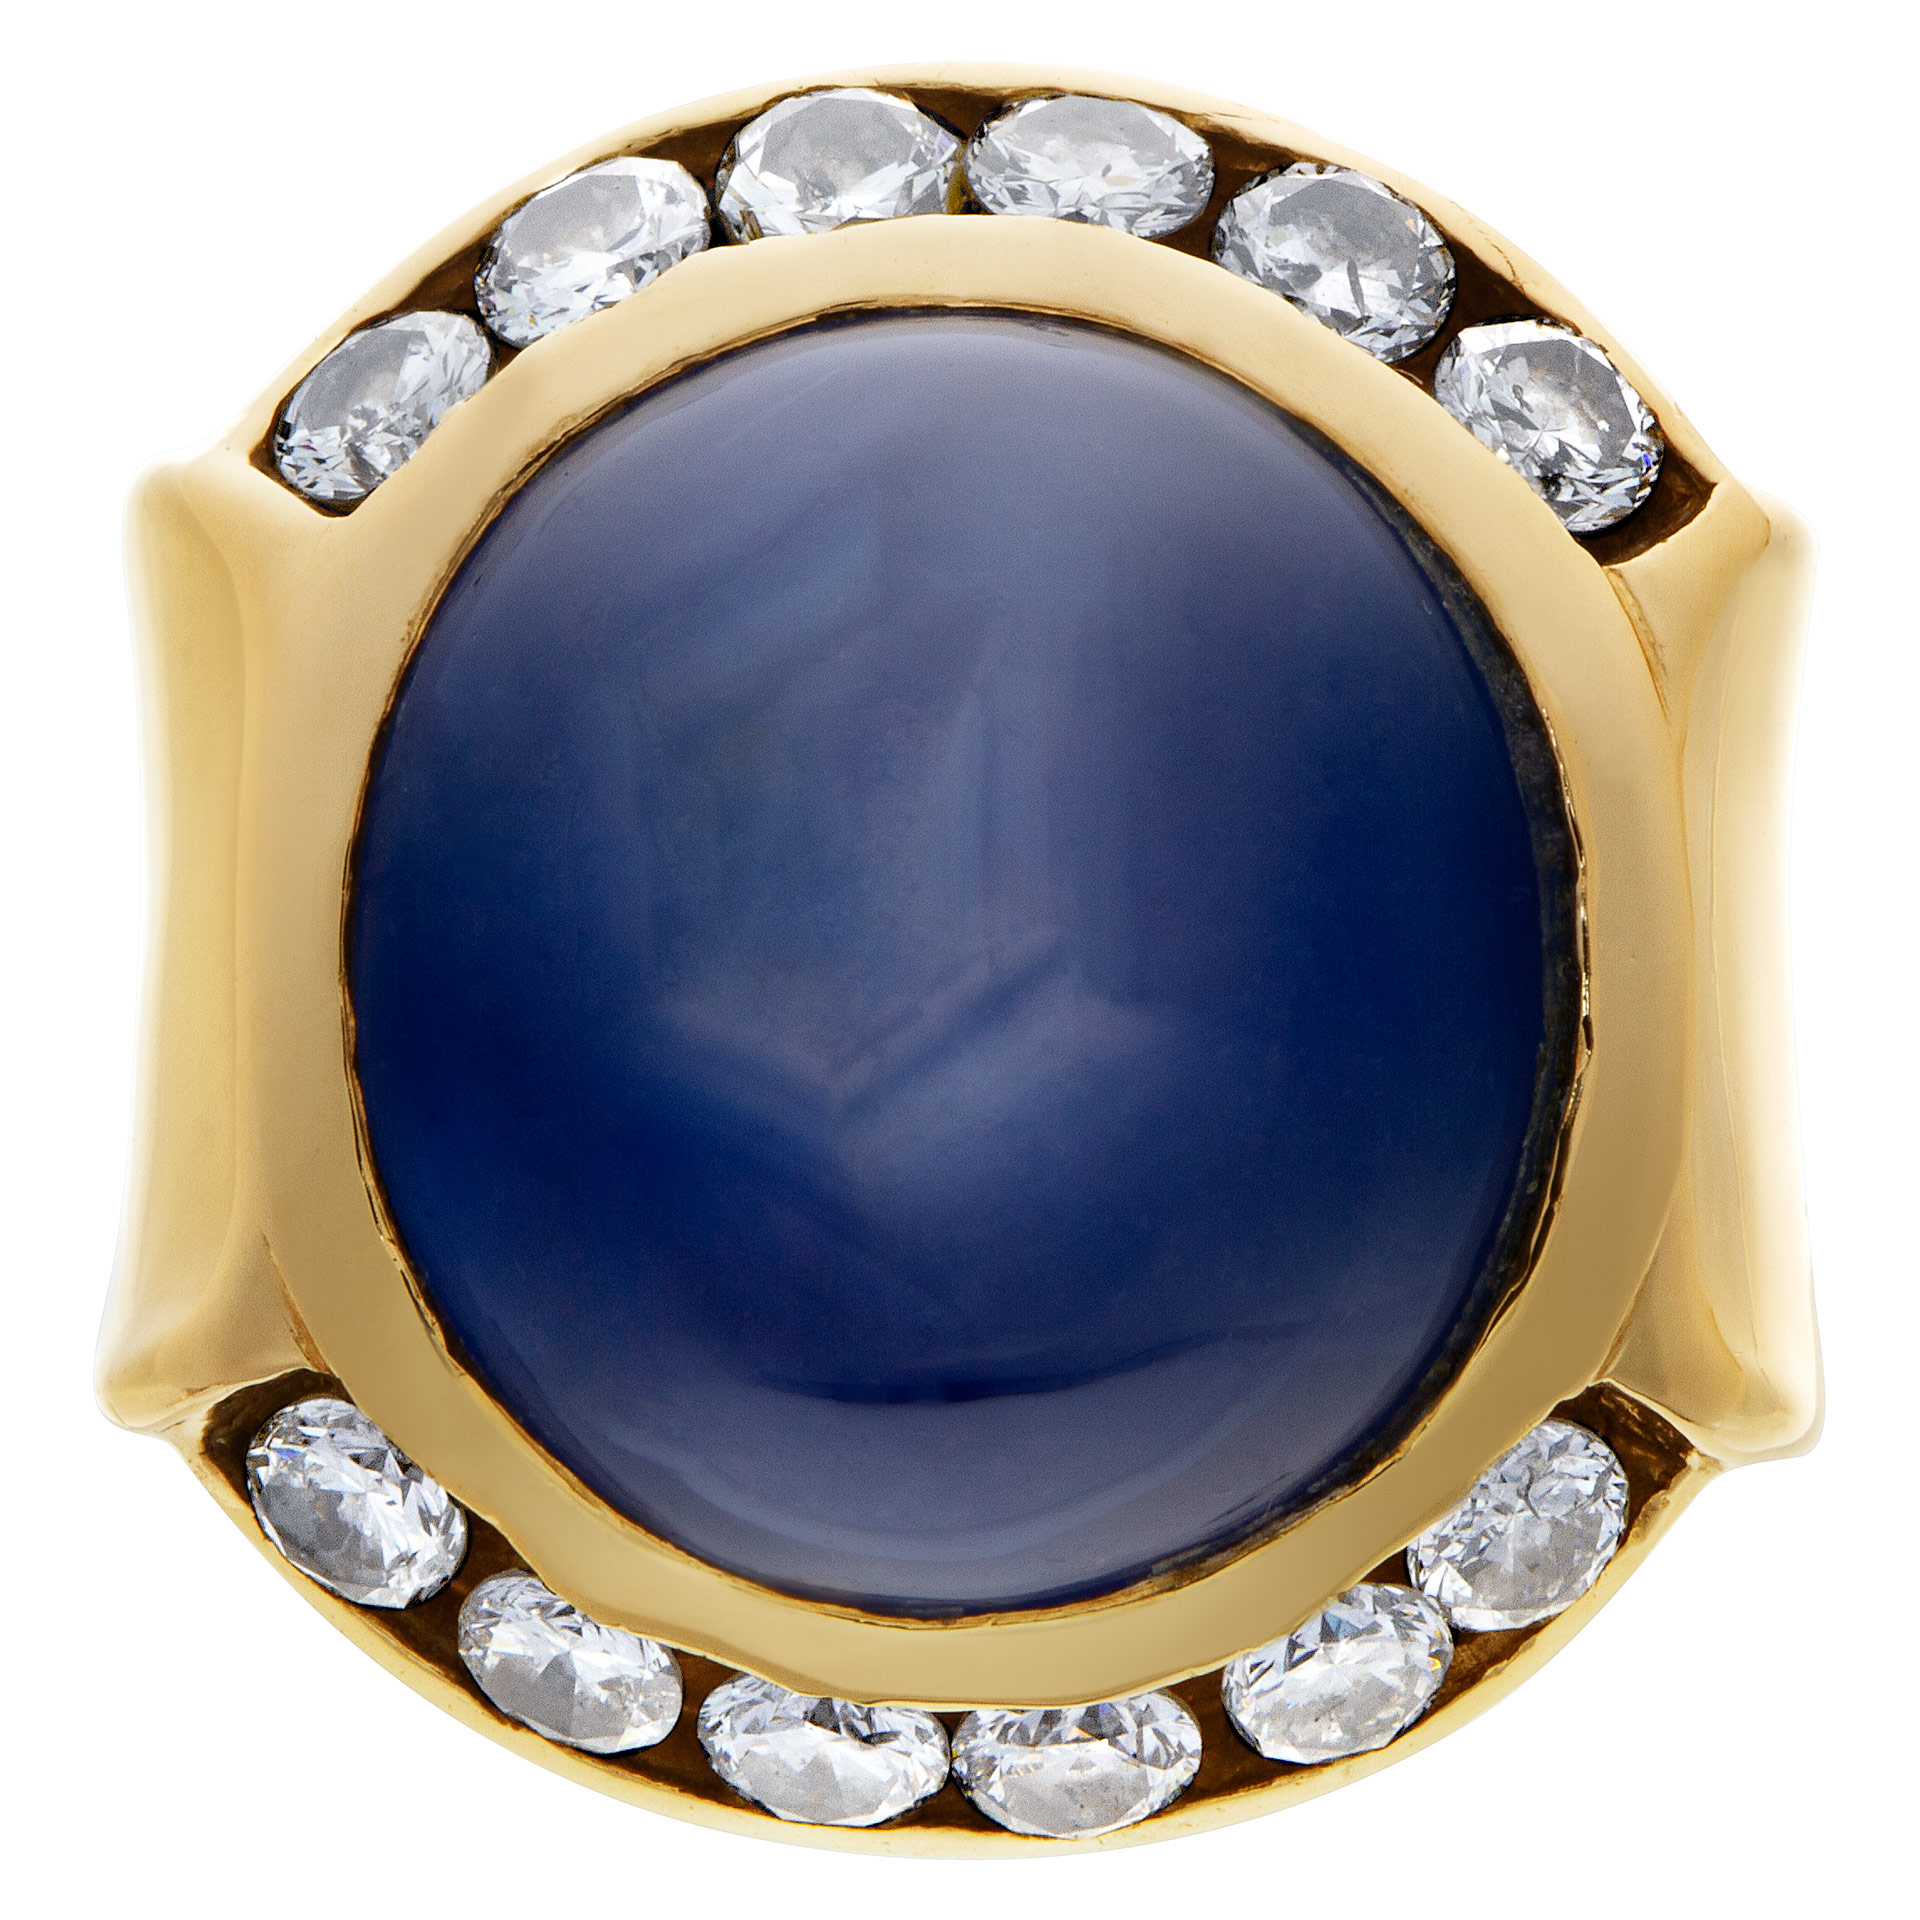 Cabochon Star sapphire & diamonds ring, set in 14K yellow gold. image 1